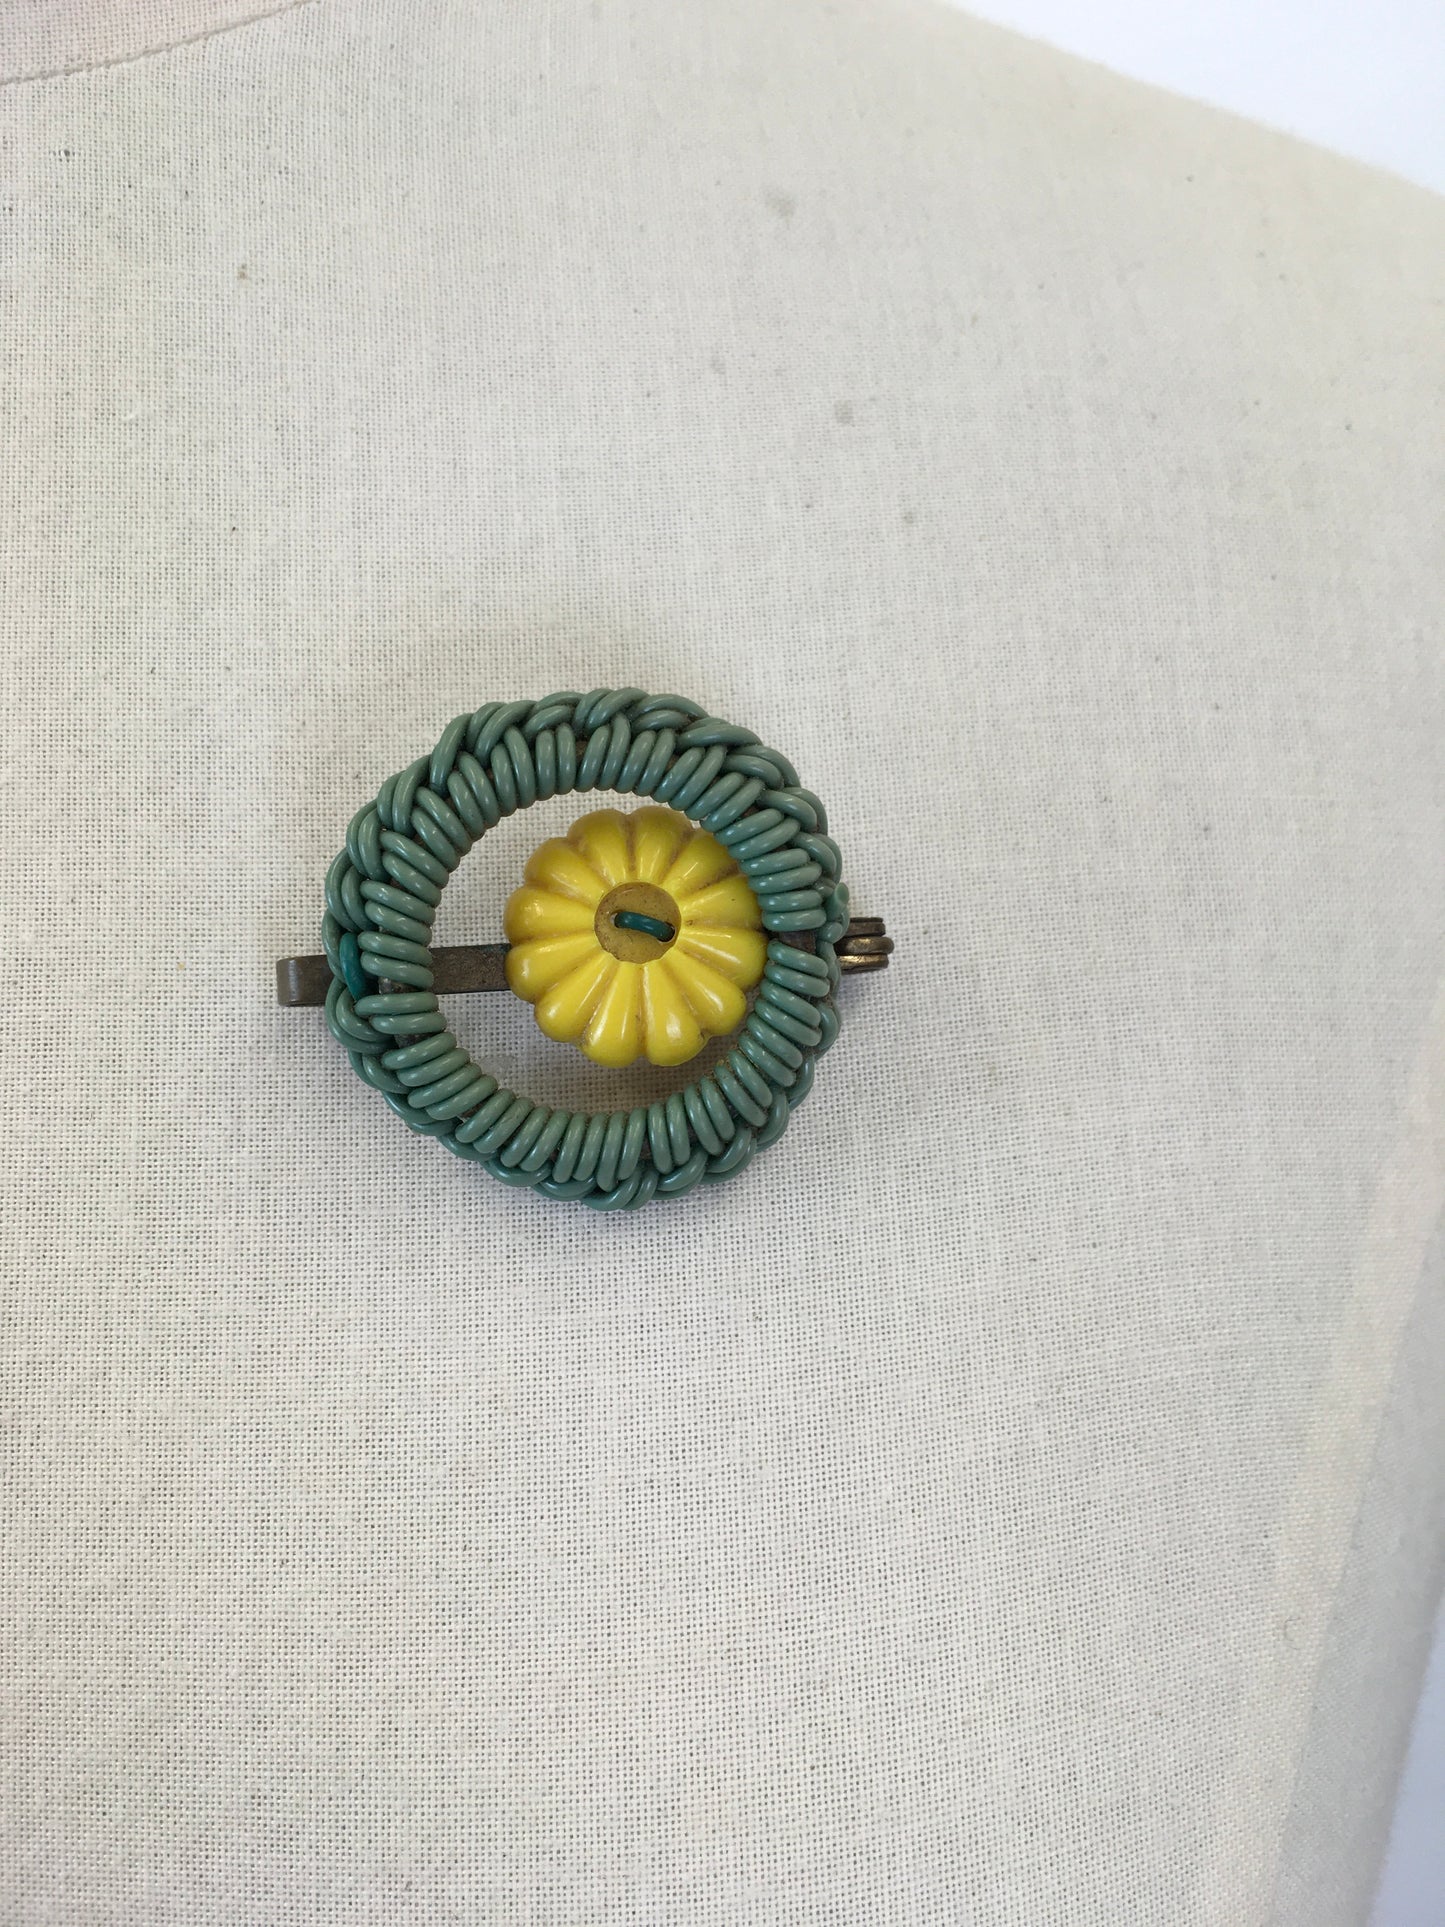 Original 1940s Telephone Cord Brooch - In Soft Green with a Sunshine Yellow Button Detailing